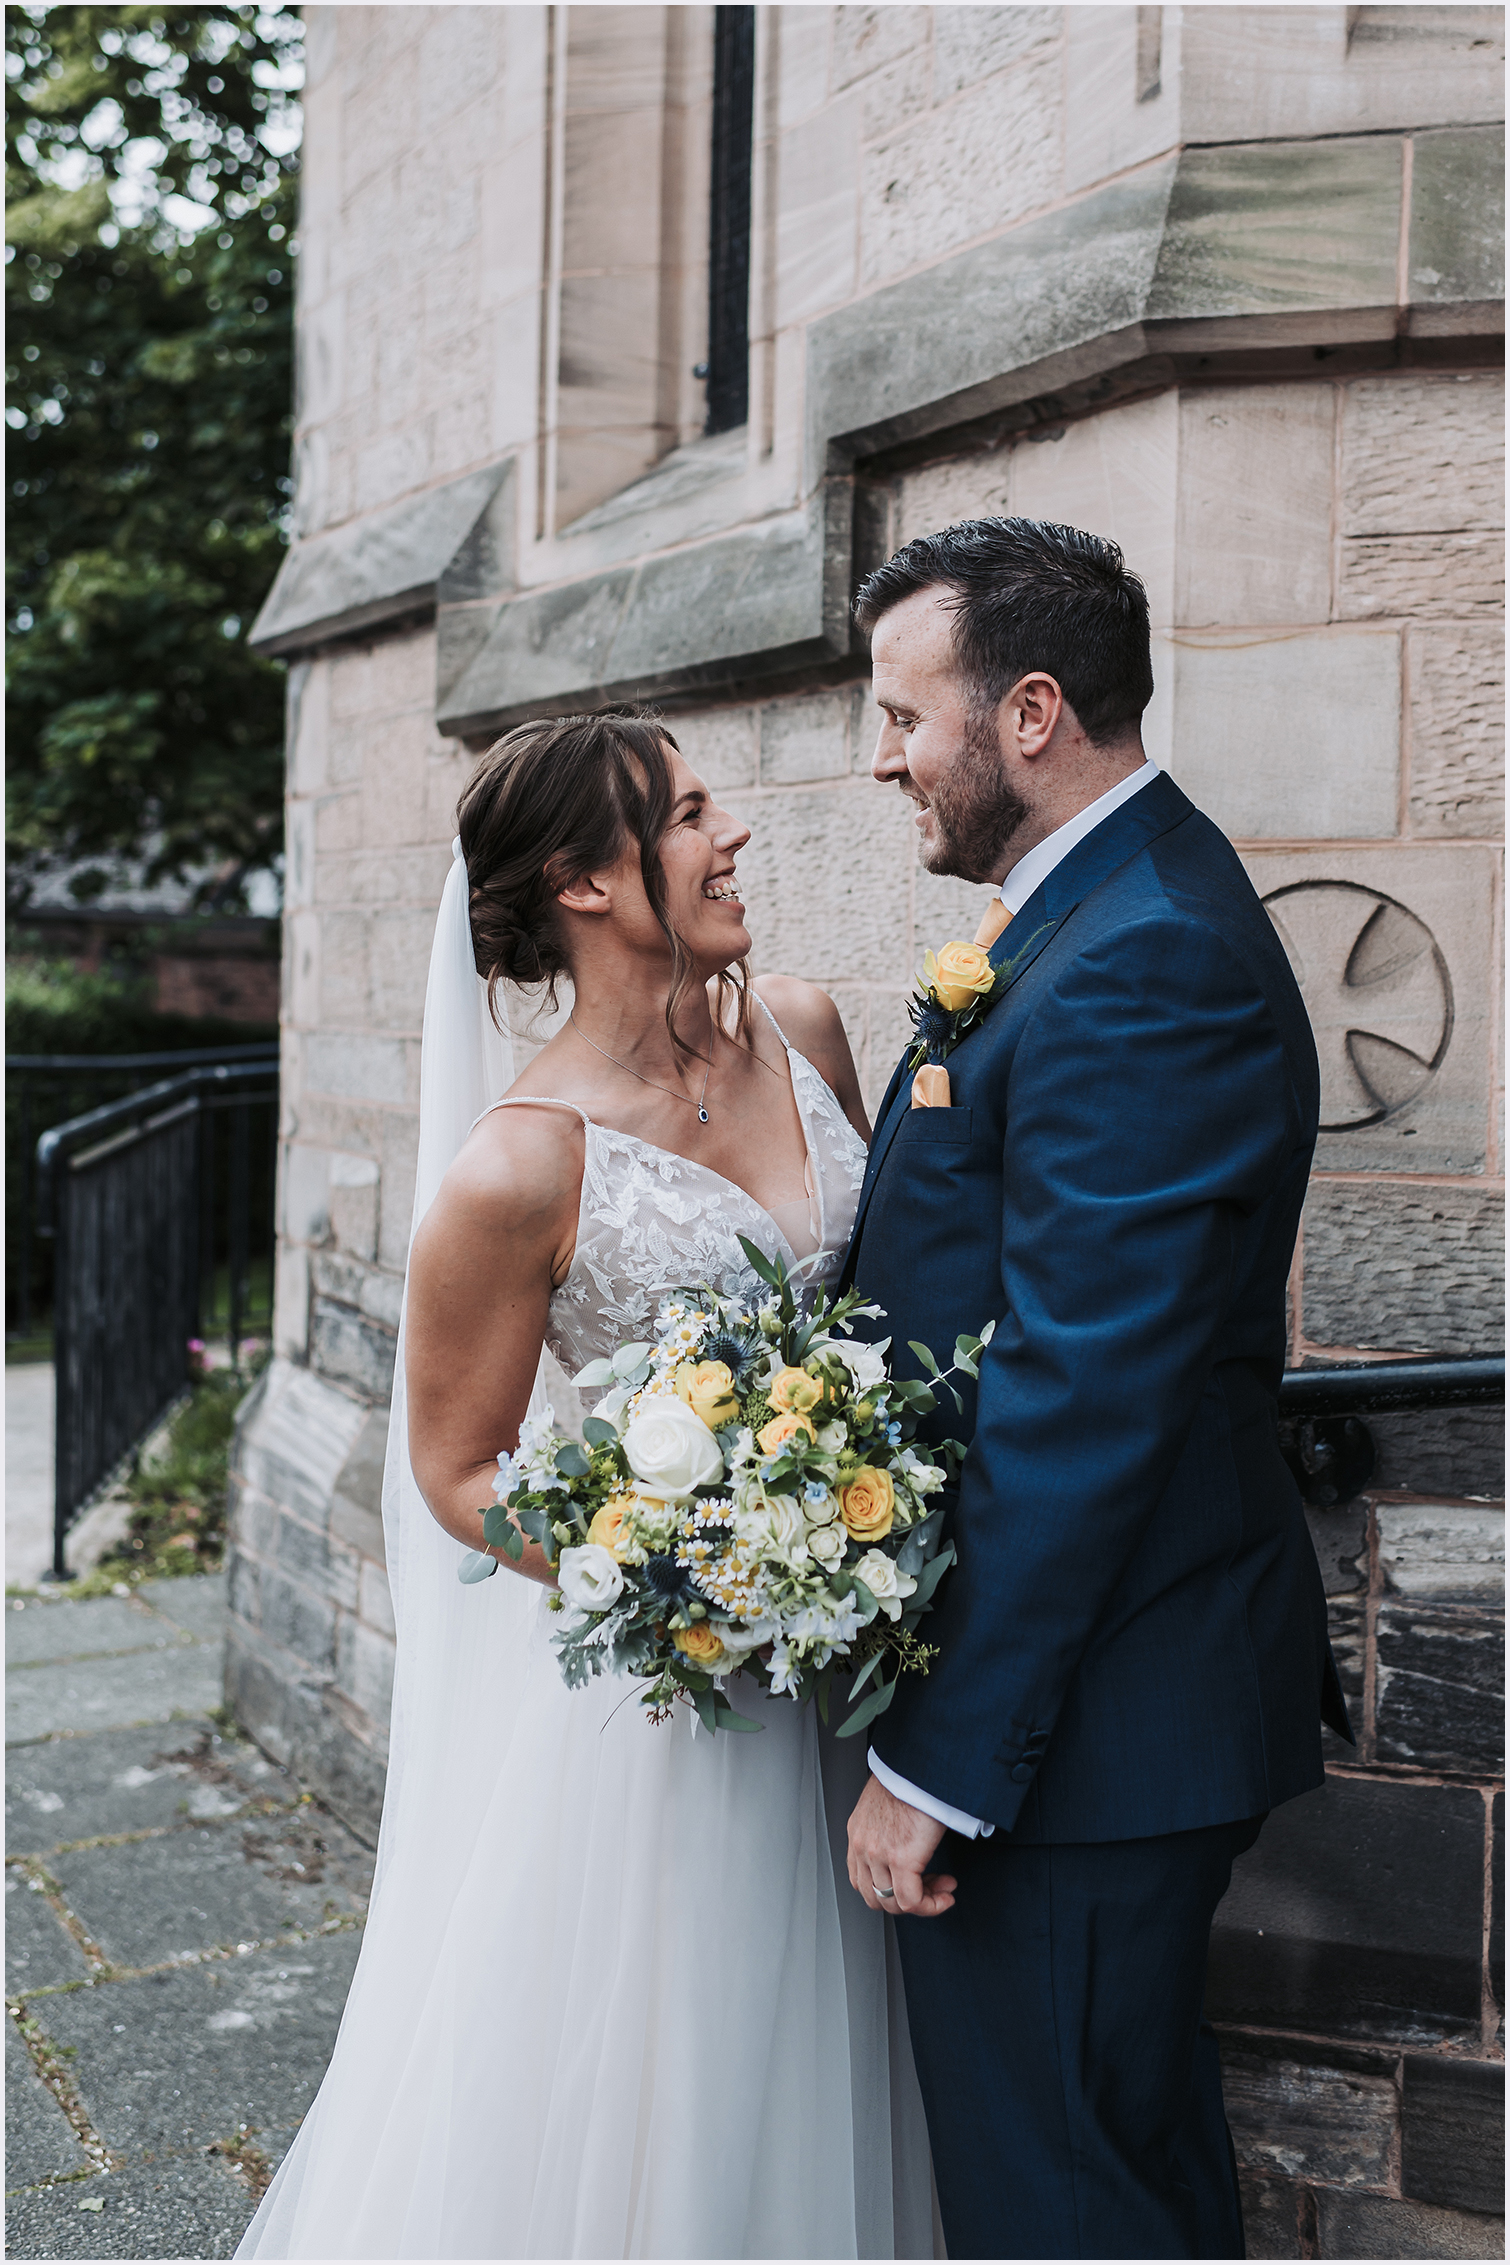 A bride and groom smile at each other outside the church where they have just got married in Chester.  Image captured by north Wales wedding photographer Helena Jayne Photography